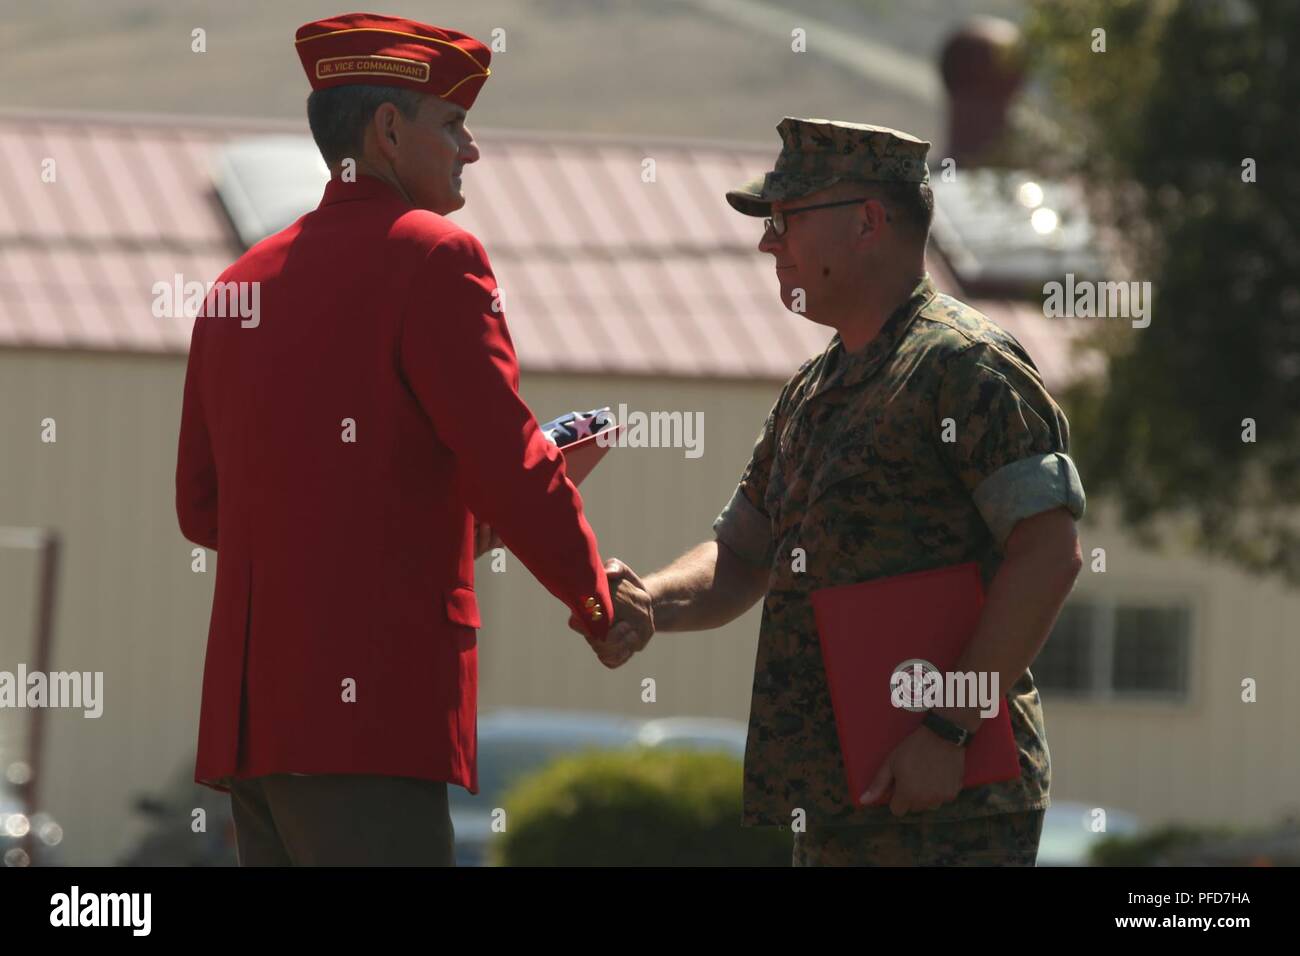 Retired U.S. Marine Corps Col. Michael Frasier, left, shakes the hand of Chief Warrant Officer 5 David C. Thomas with Fire and Maneuver Intergration Division, Headquarters Marine Corps, during a retirement ceremony at Marine Corps Base Camp Pendleton, Calif., June 7, 2018. The ceremony was held in honor of Thomas for his 30 years of meritorious service. Stock Photo